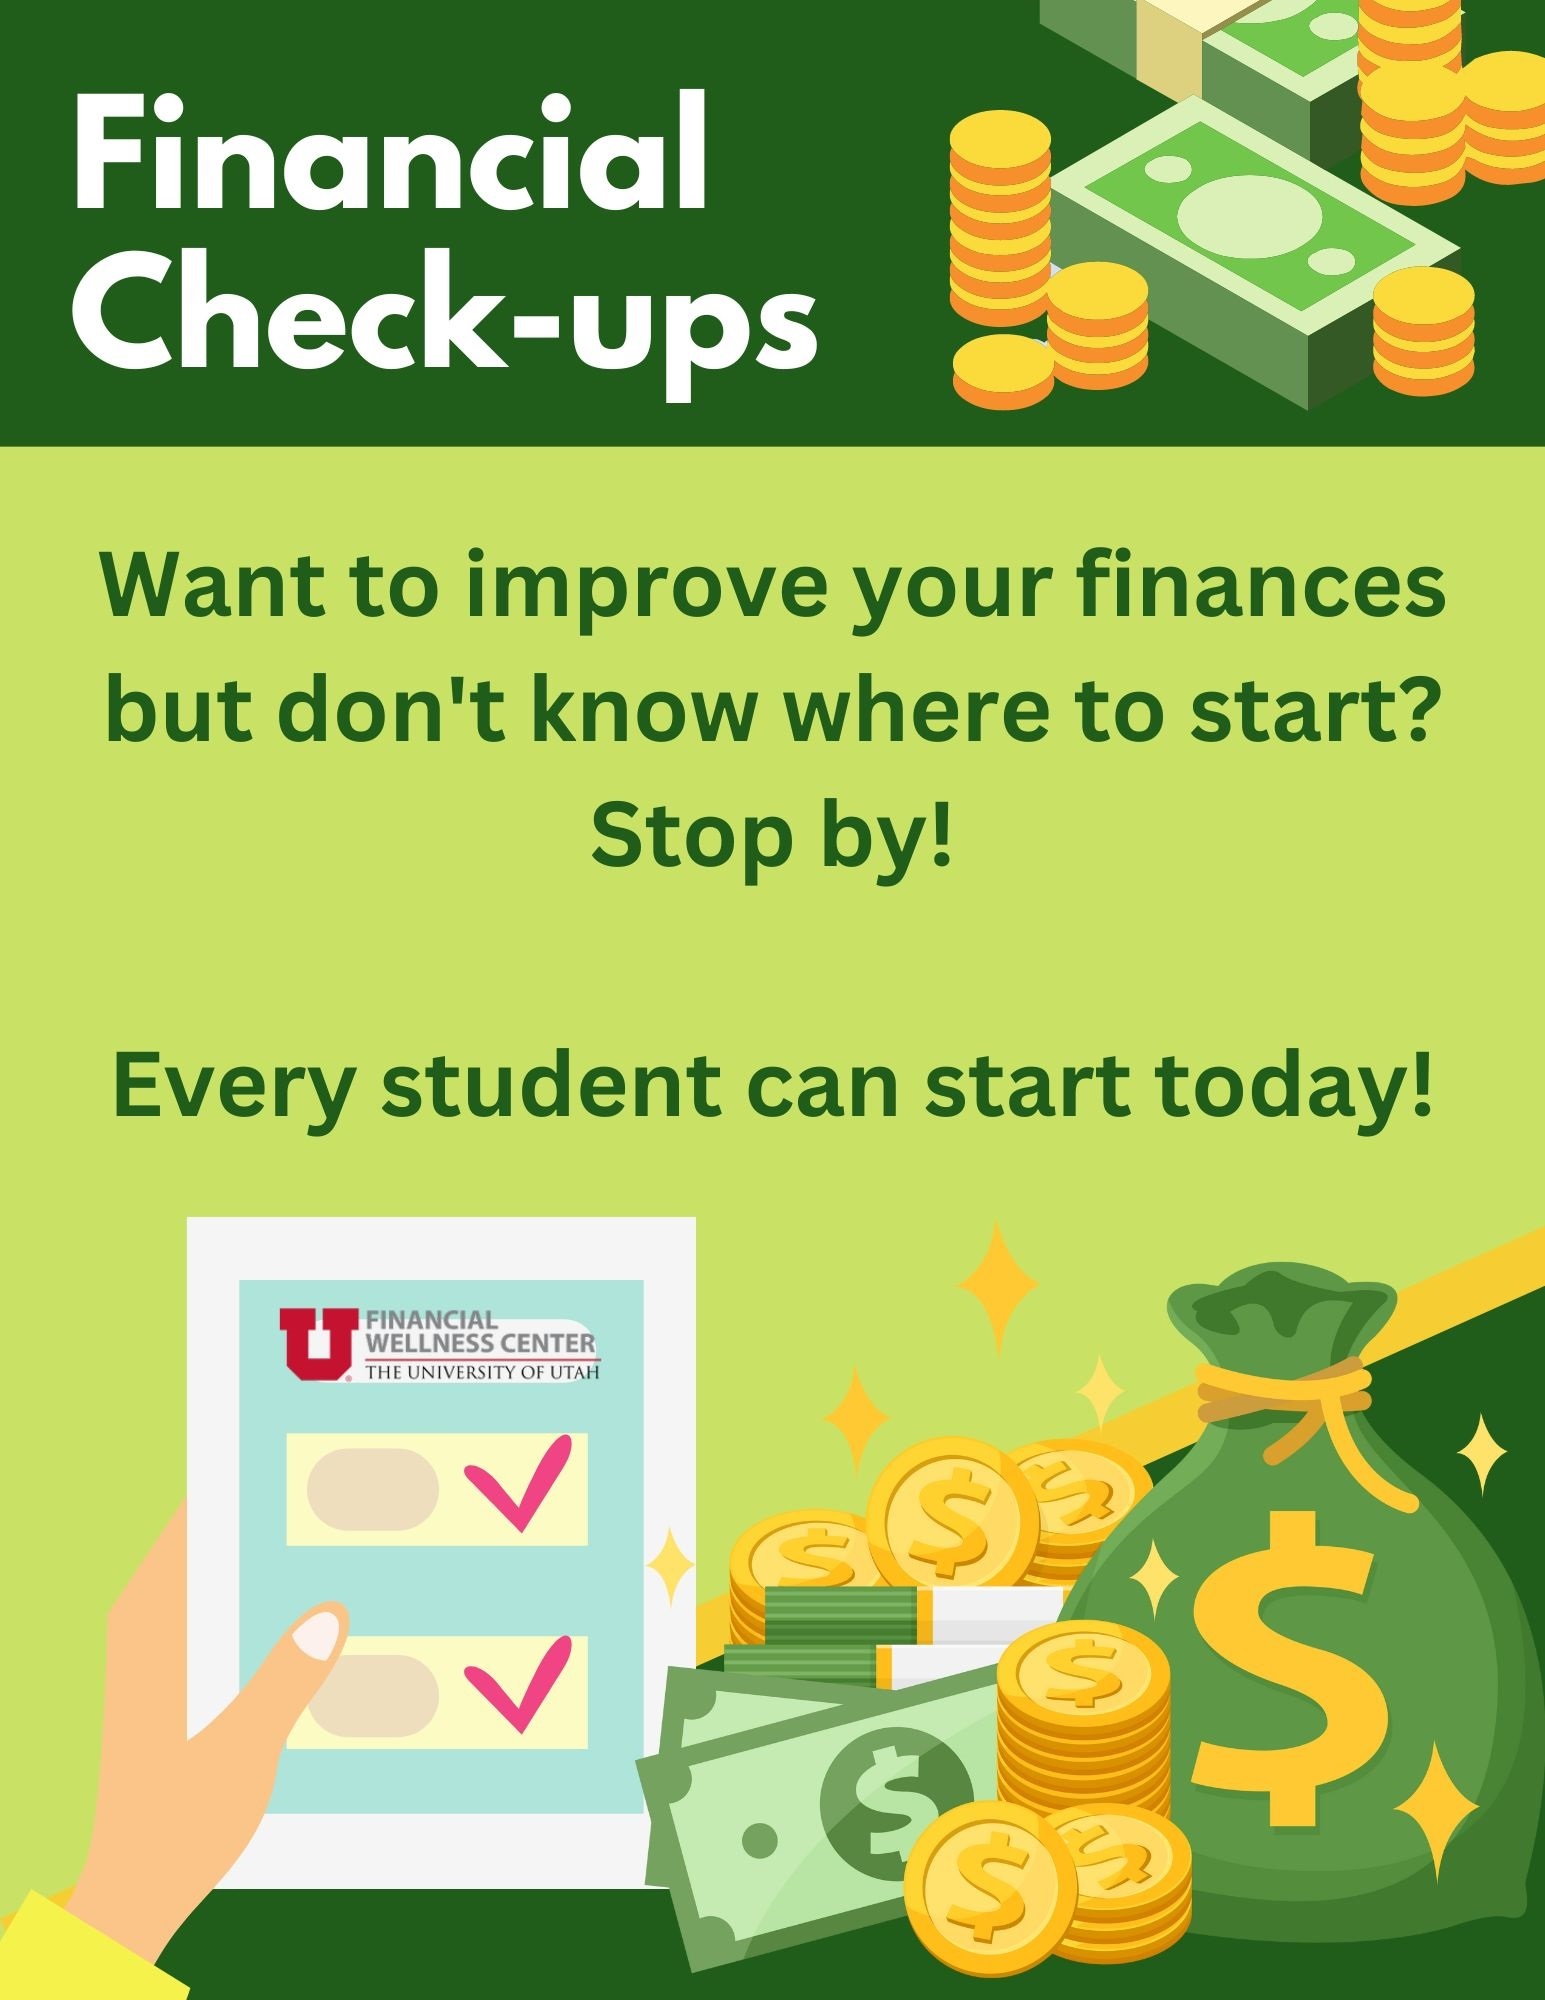 we do financial checkups, every student can start where they are